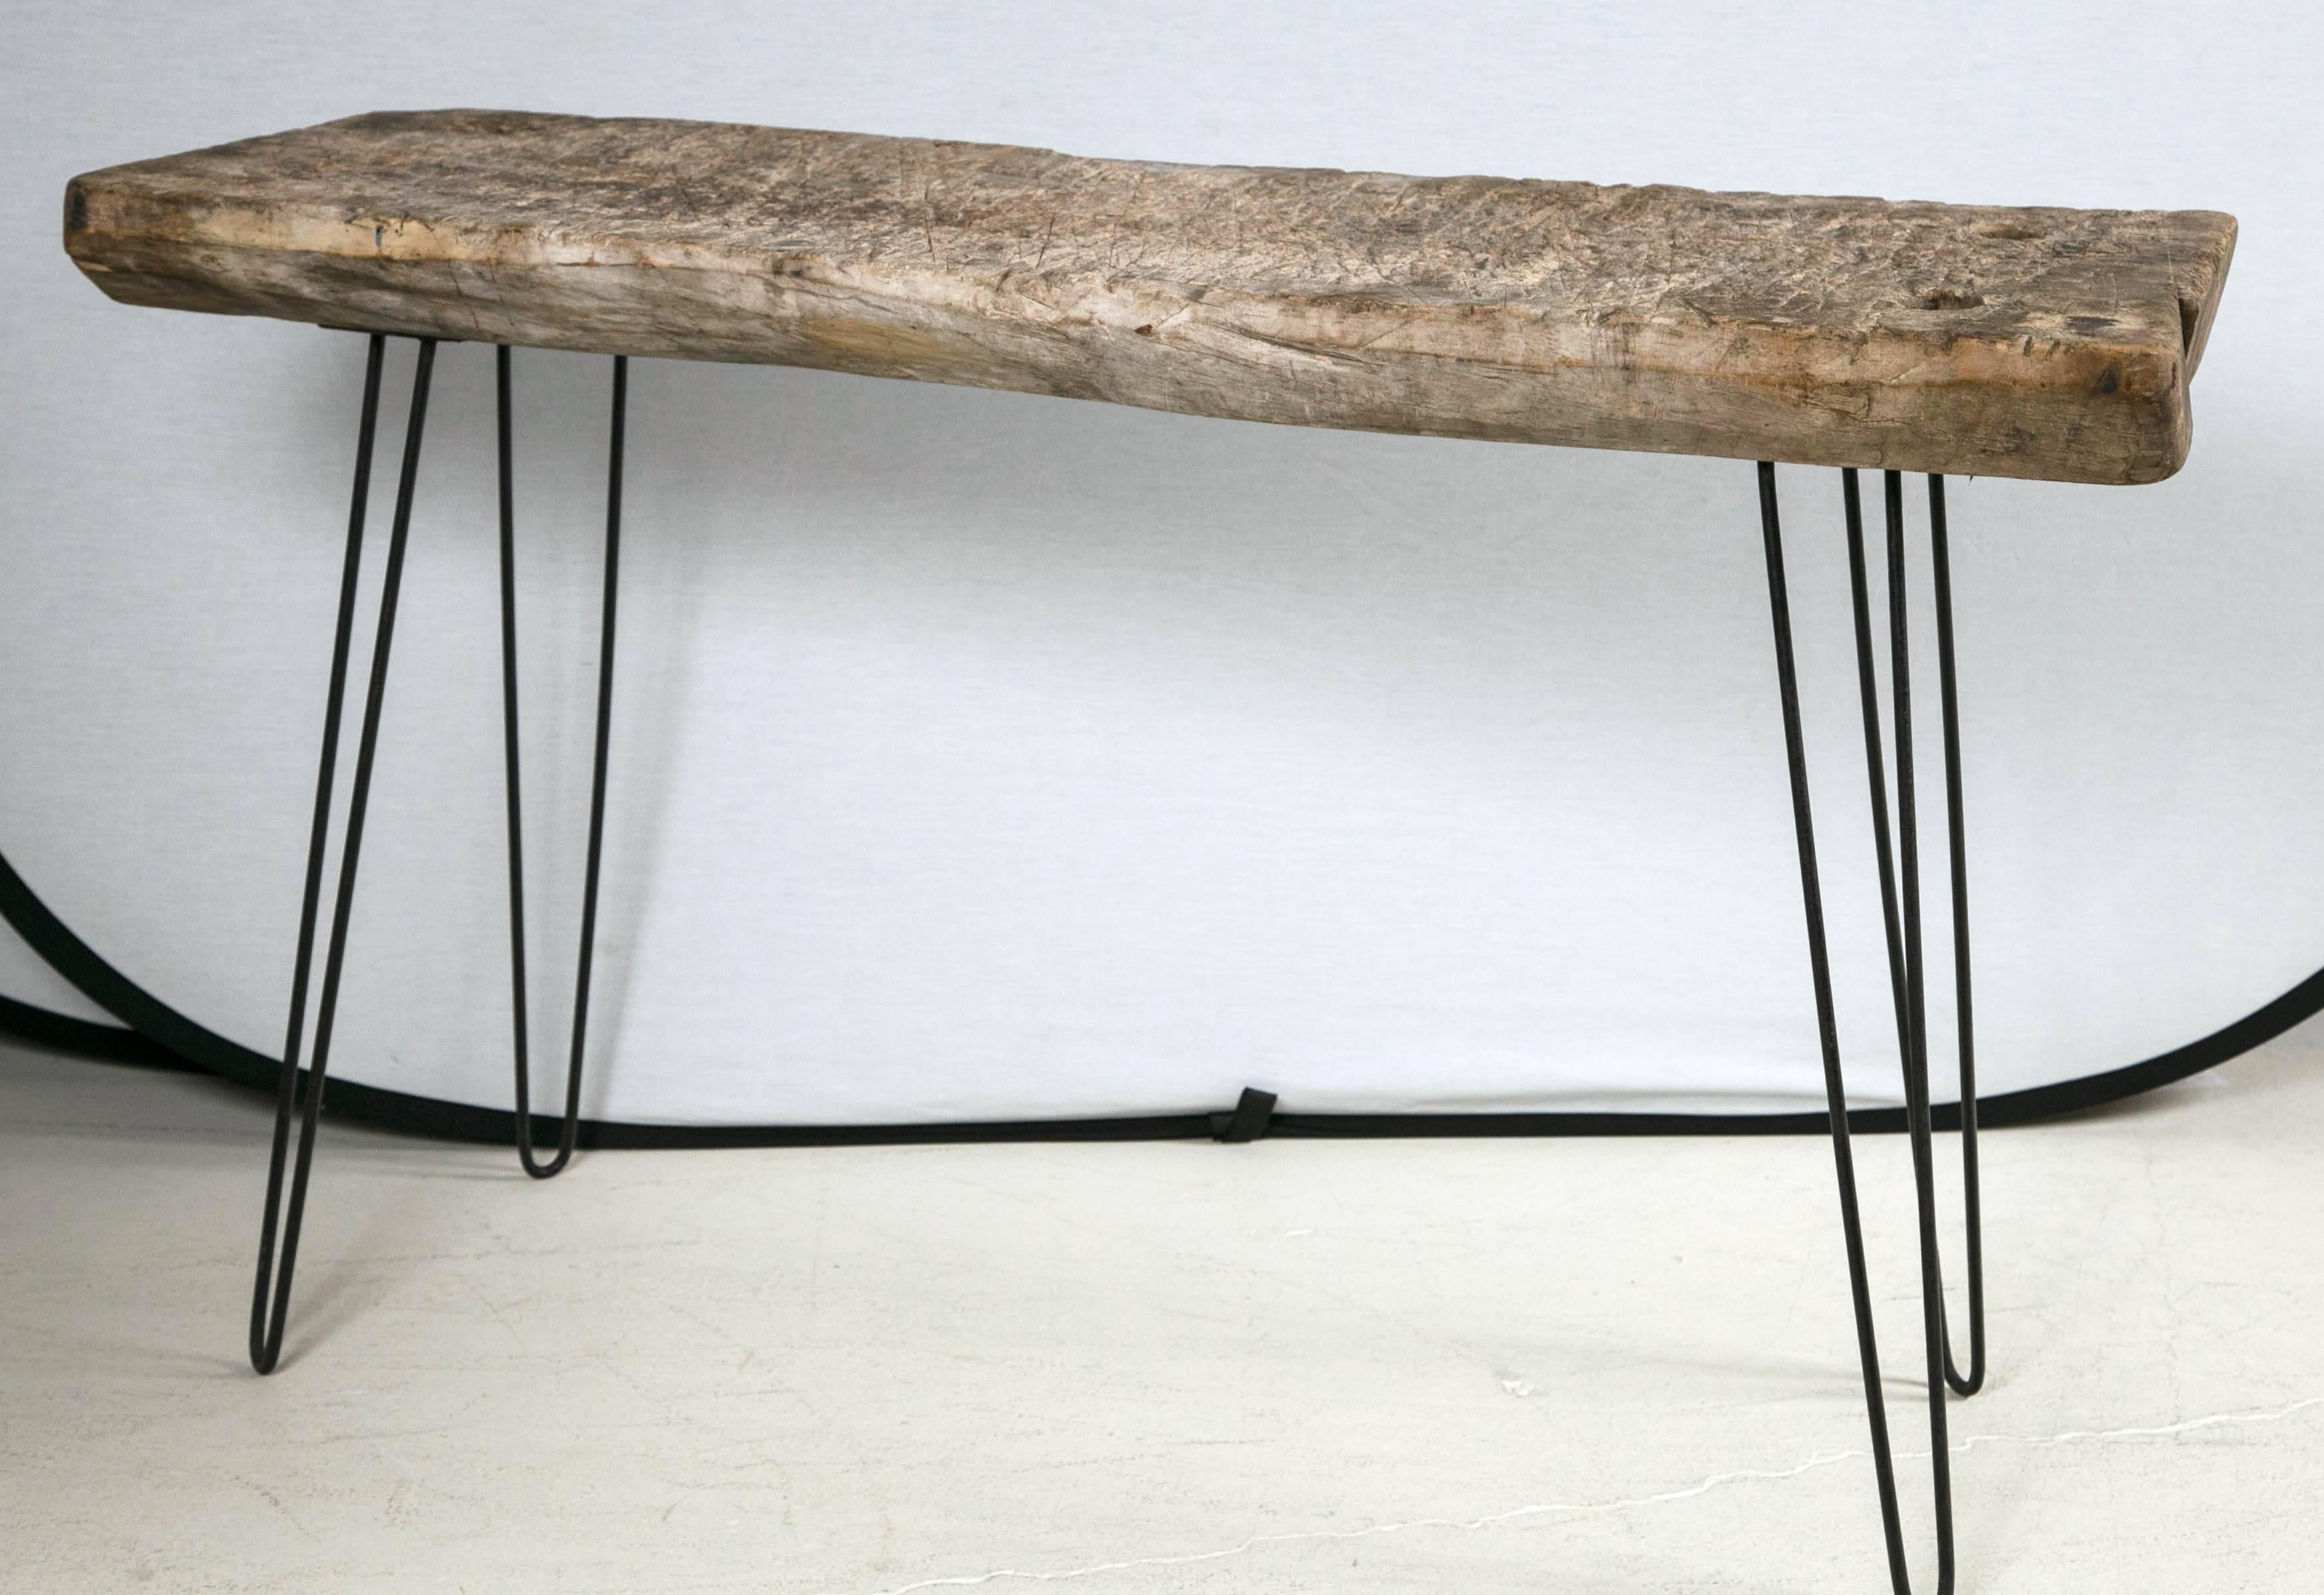 Unusual Primitive wooden top console with hand chamfered sides set on modern hairpin iron legs.